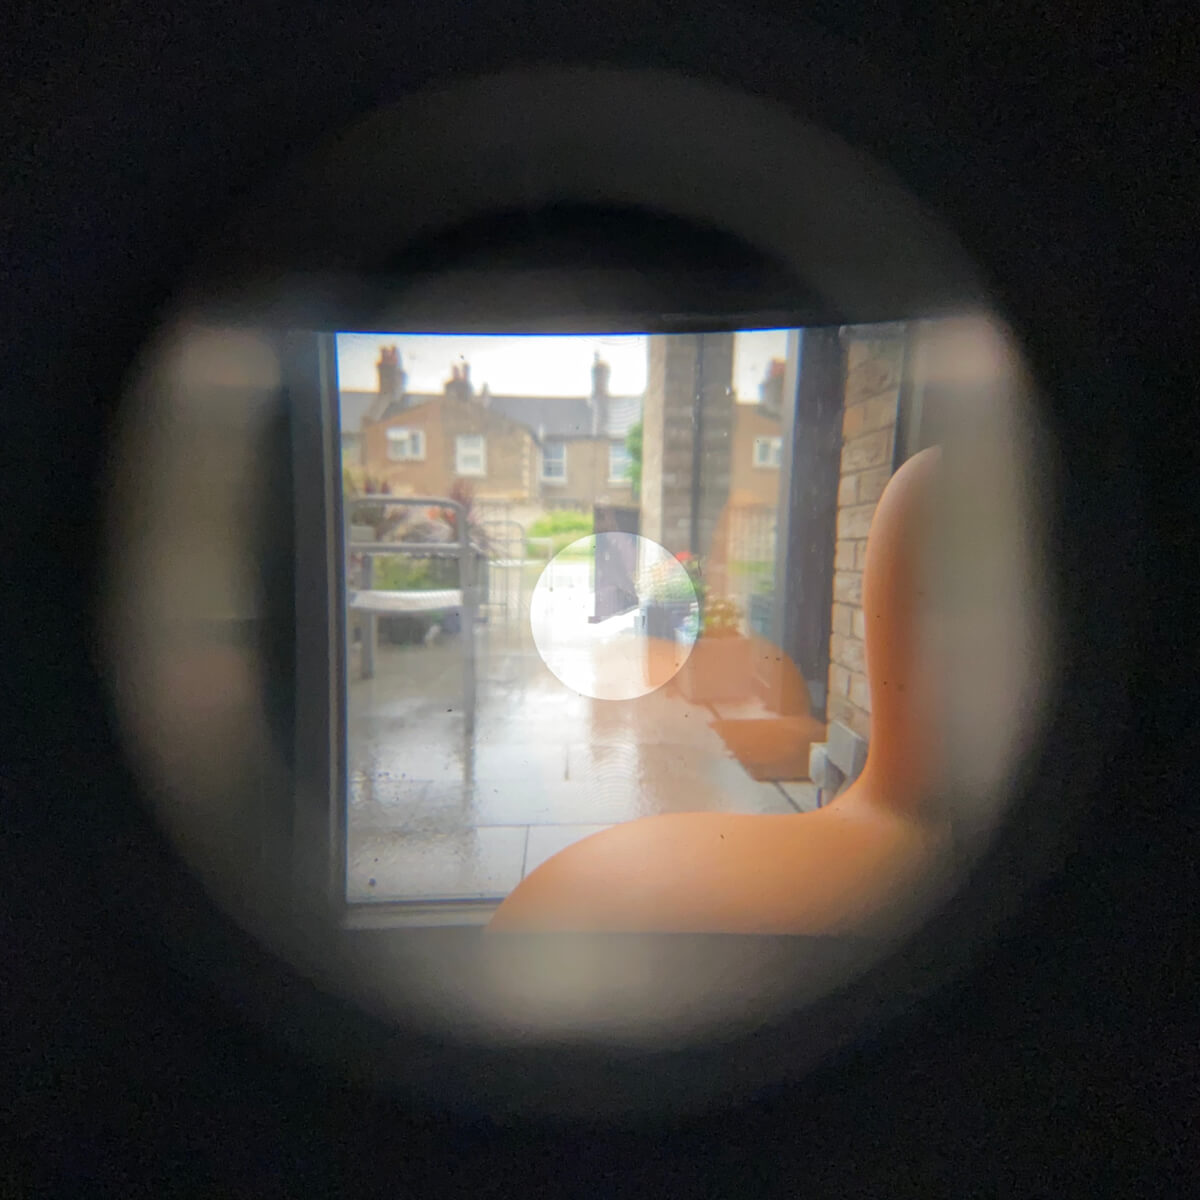 The view through the pentaprism